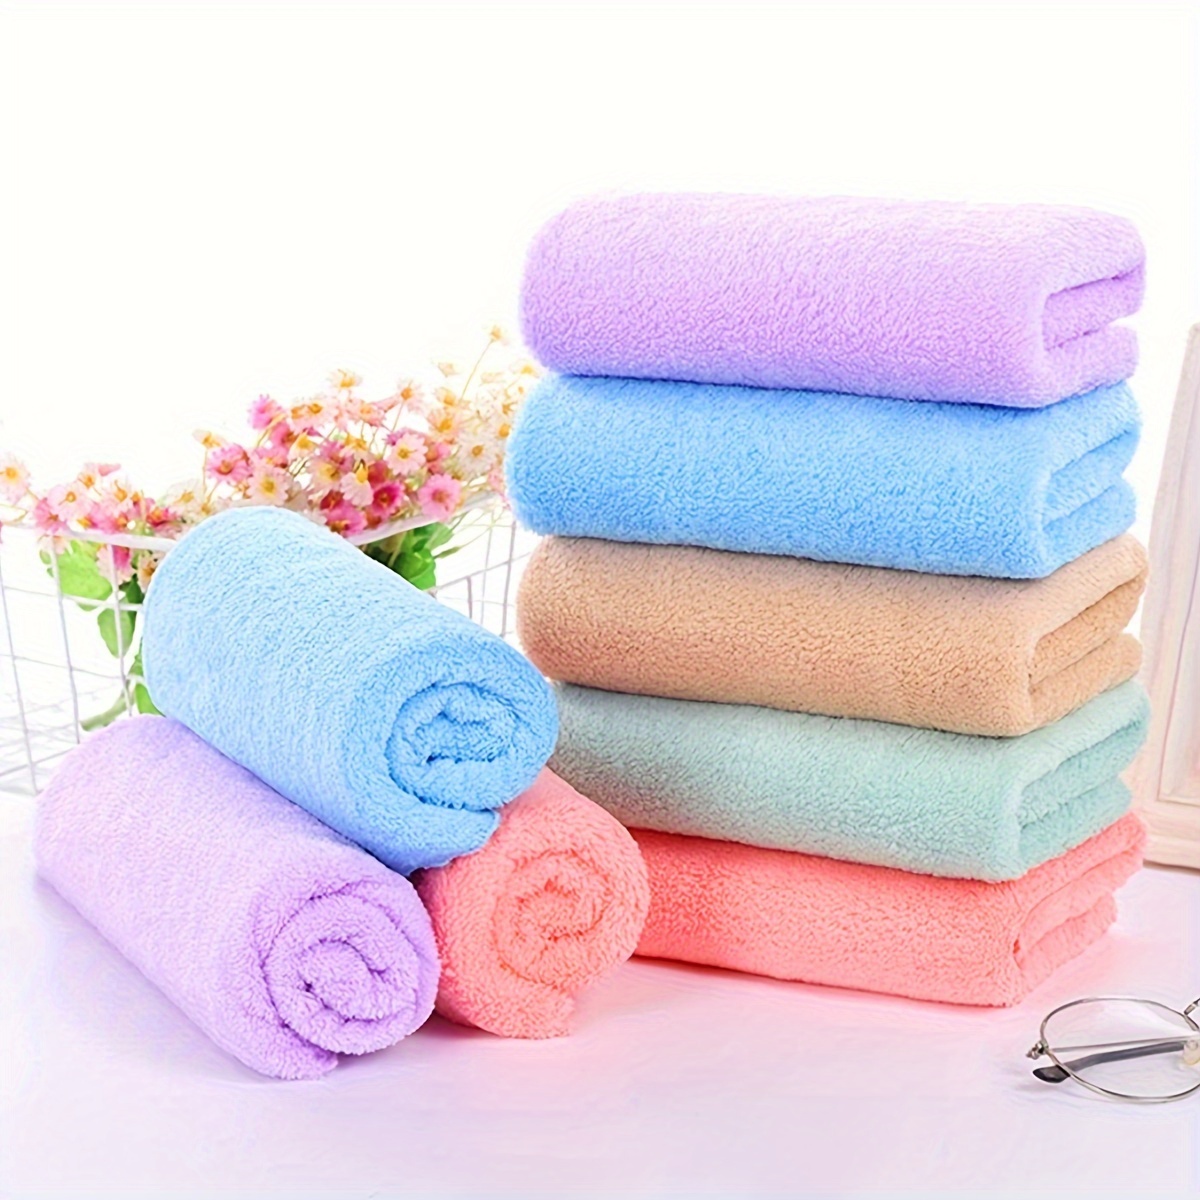 

1pc Hand Towels Quick Dry Absorbent For Bathroom Spa Shower Soft Thick Toallas De Baño Grandes Women Birthday Gift Ideas Mother Day Grandma Nana Wife Sister Her